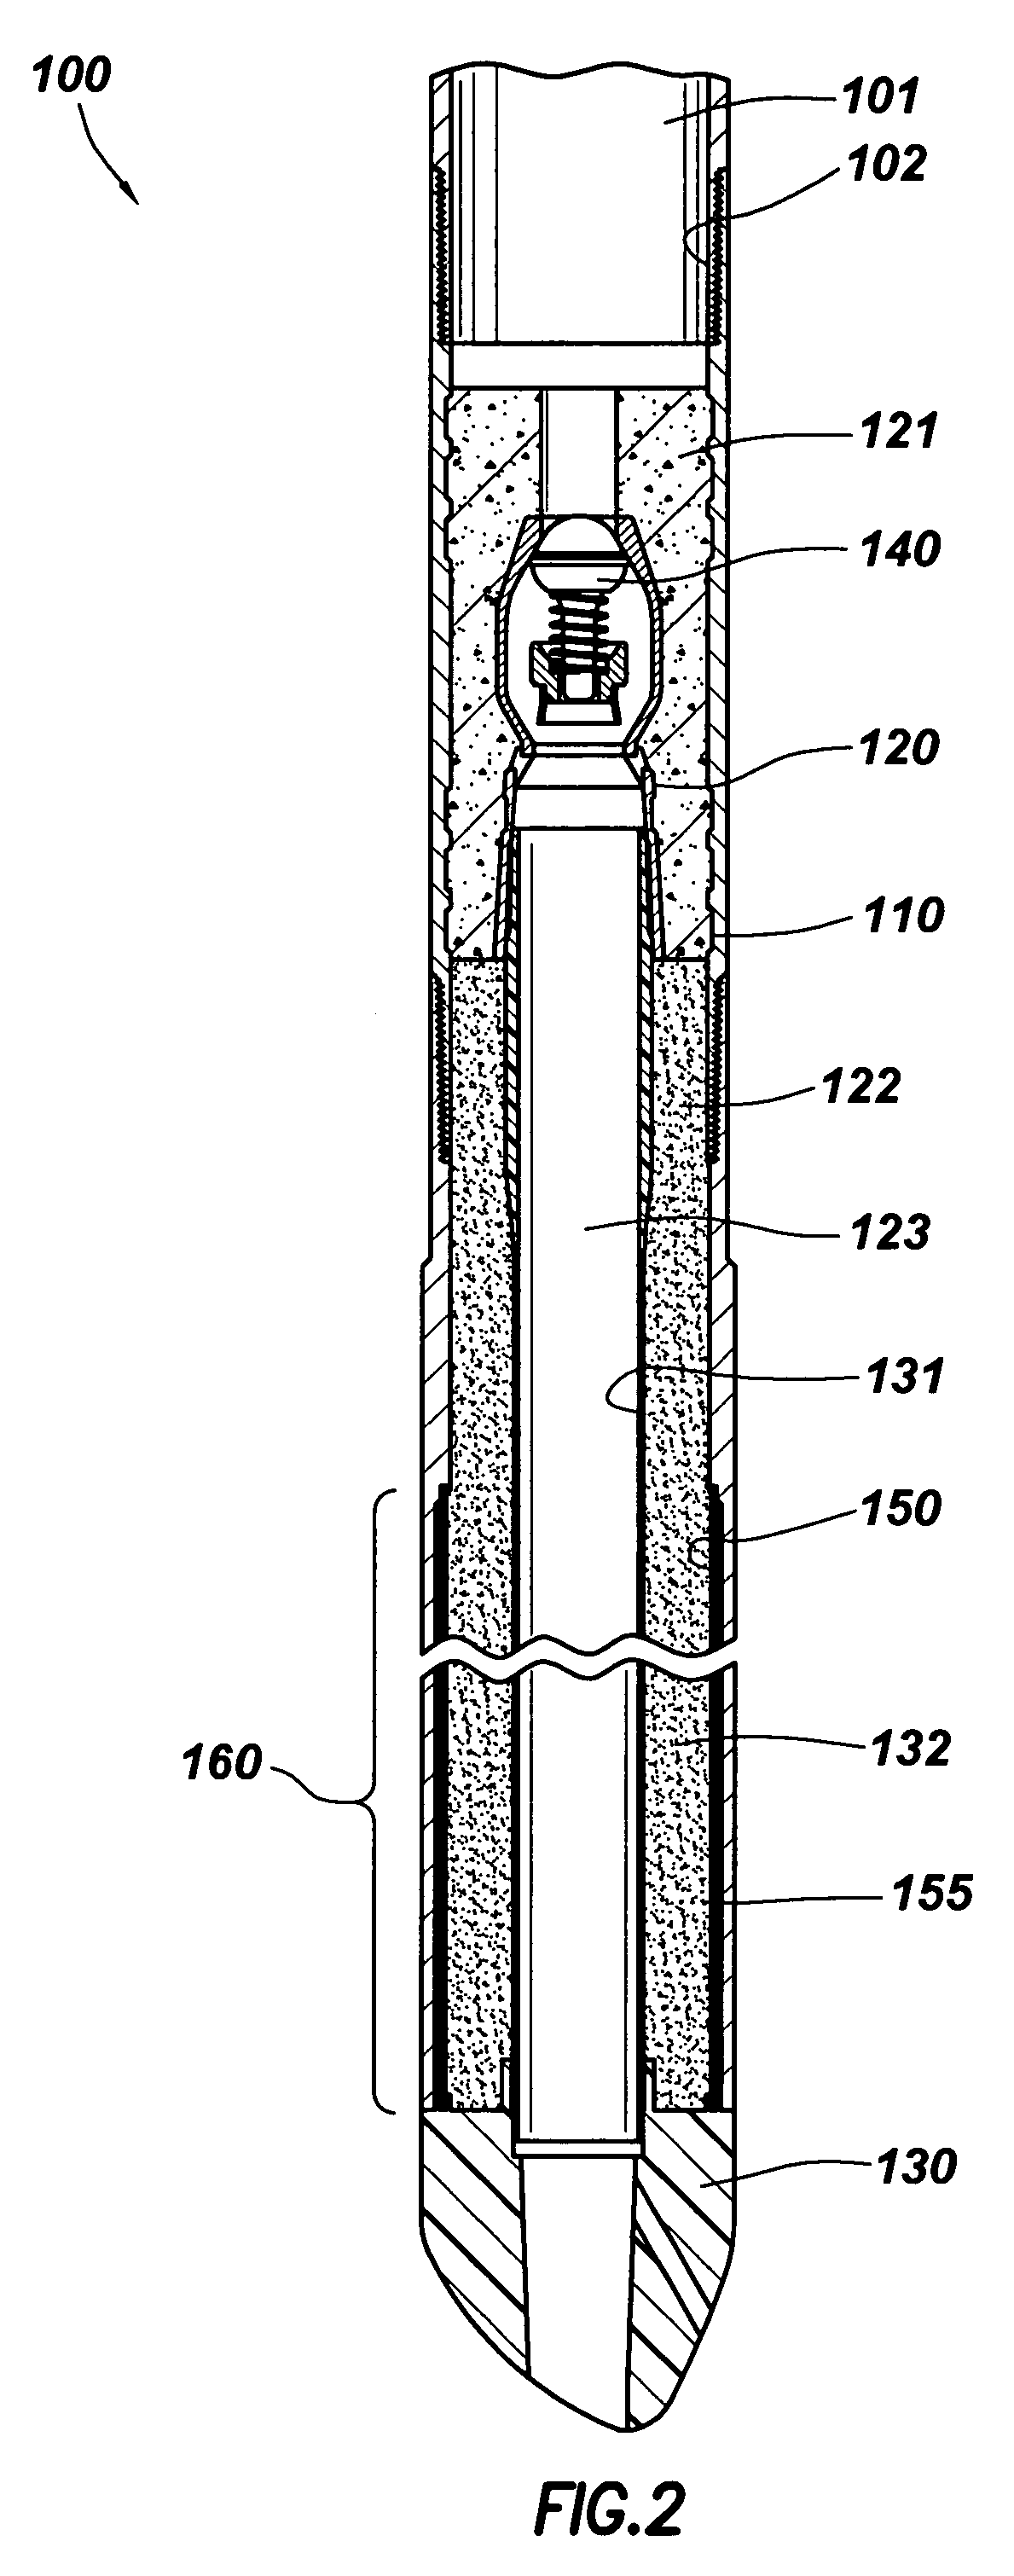 Completion apparatus and methods for use in wellbores